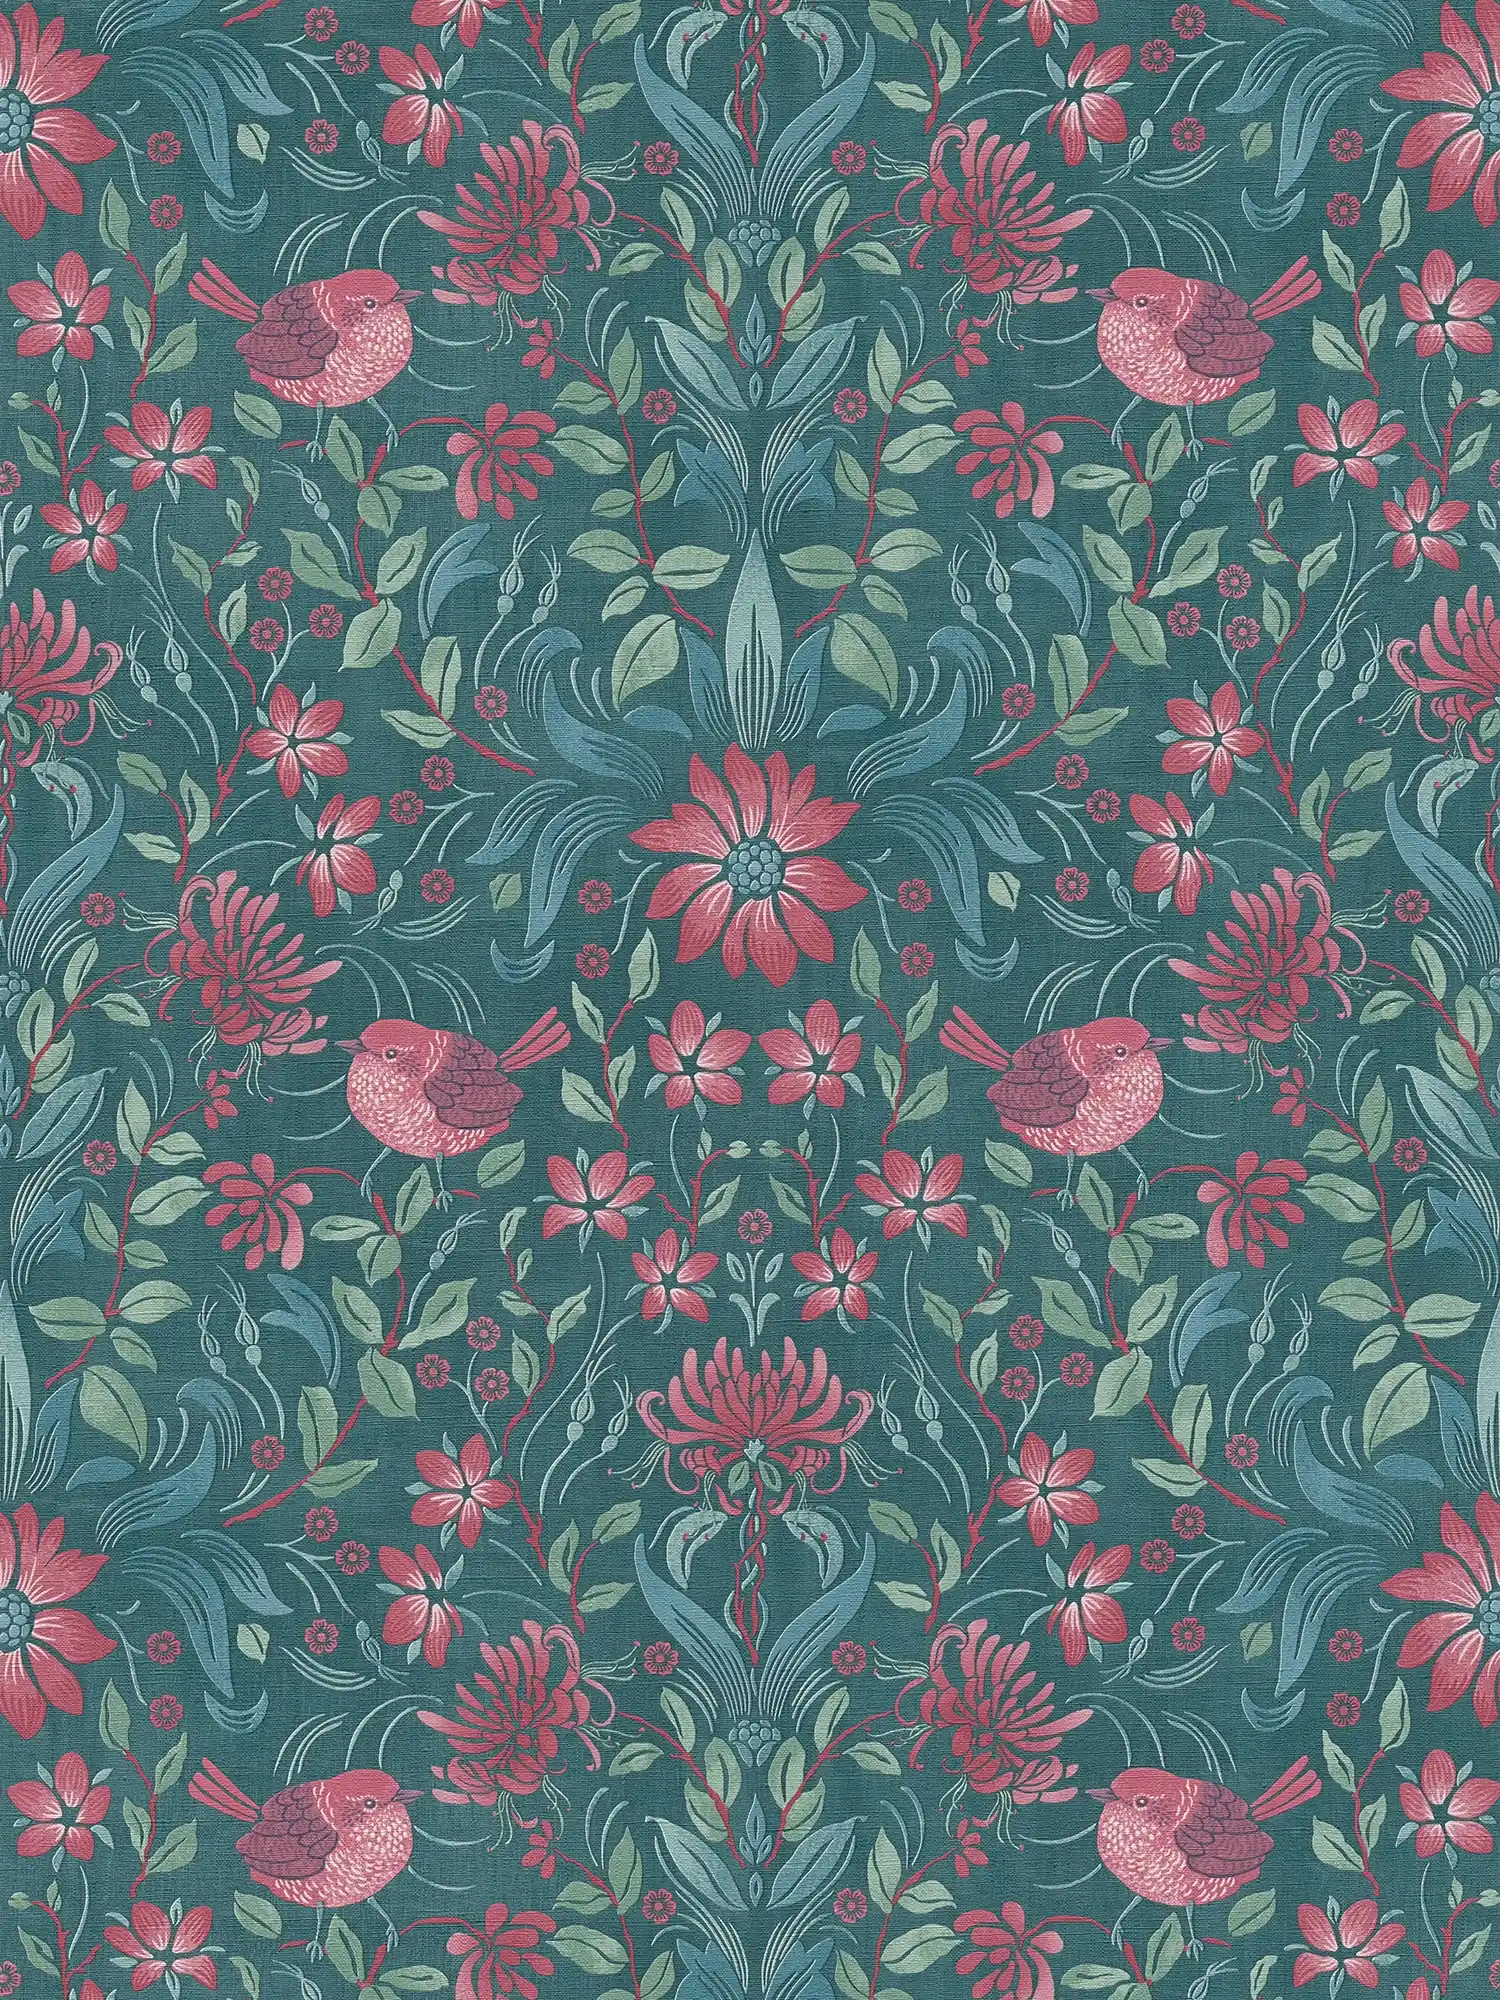 Floral non-woven wallpaper with flowers & birds - dark green, pink, green
